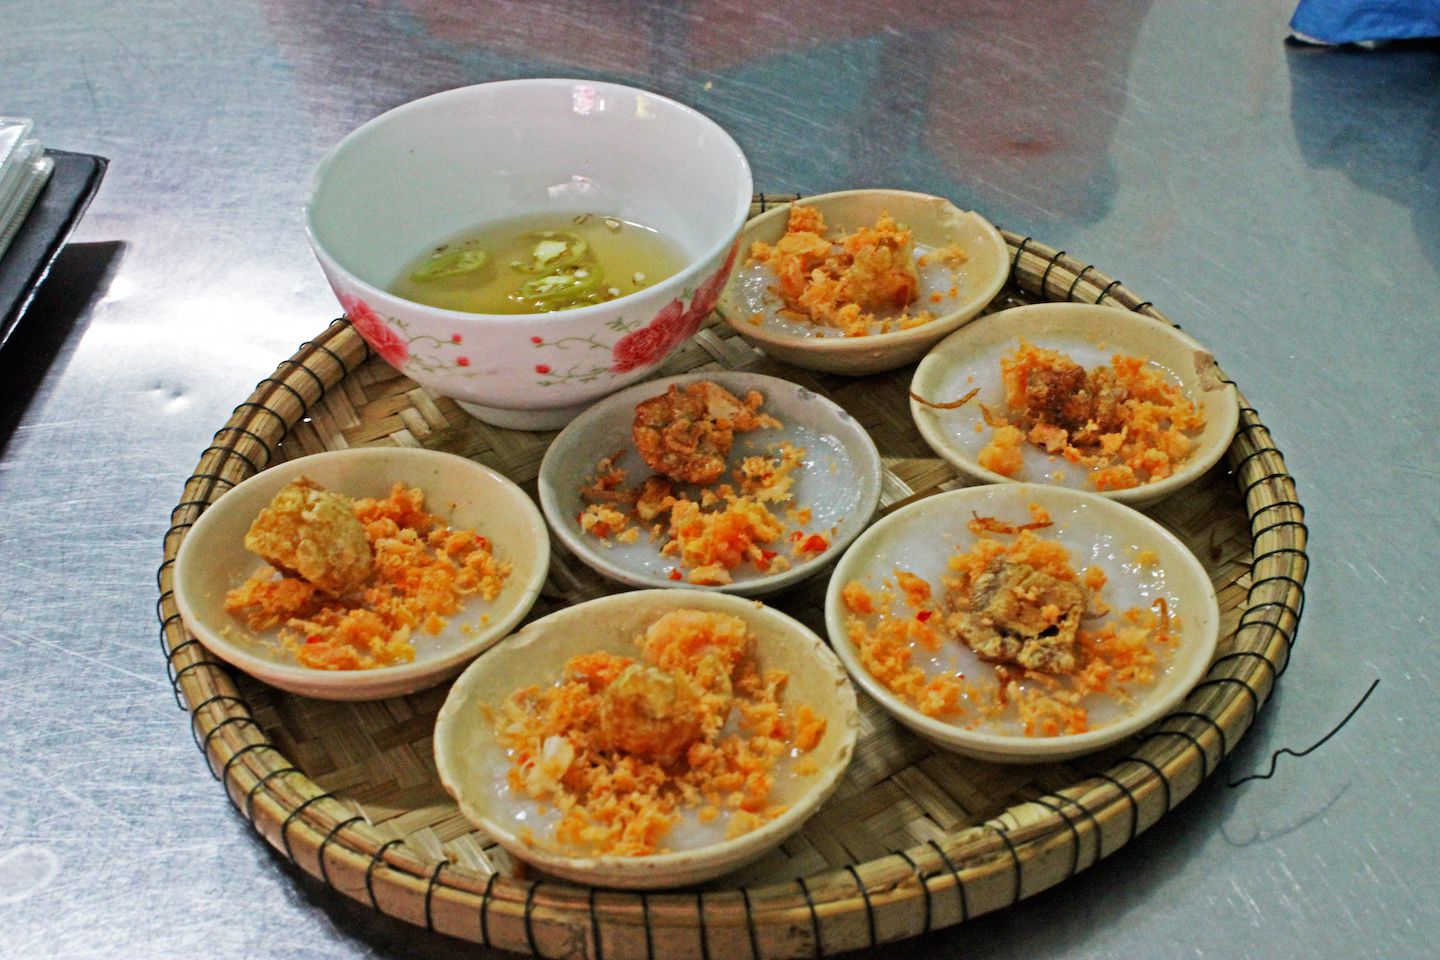 Plate with banh beo in Hue